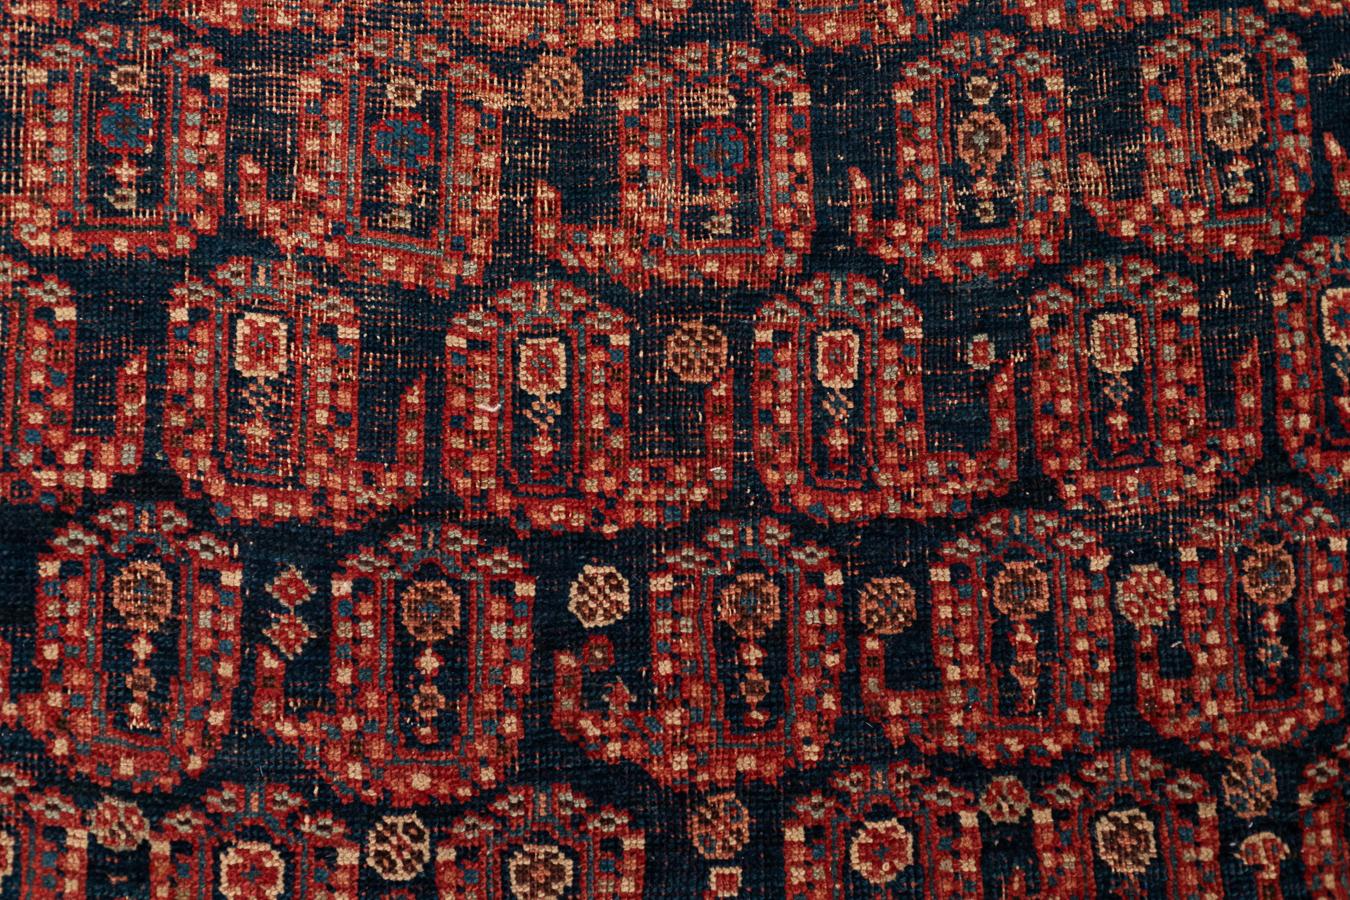 Afshar -  Southern Persia
You will be fascinated by this highly sophisticated rug, woven some 150 years ago by the Persian Afshar nomads. Featuring a repeating design and precise detailing, this large Afshar has a surprising level of sharpness and